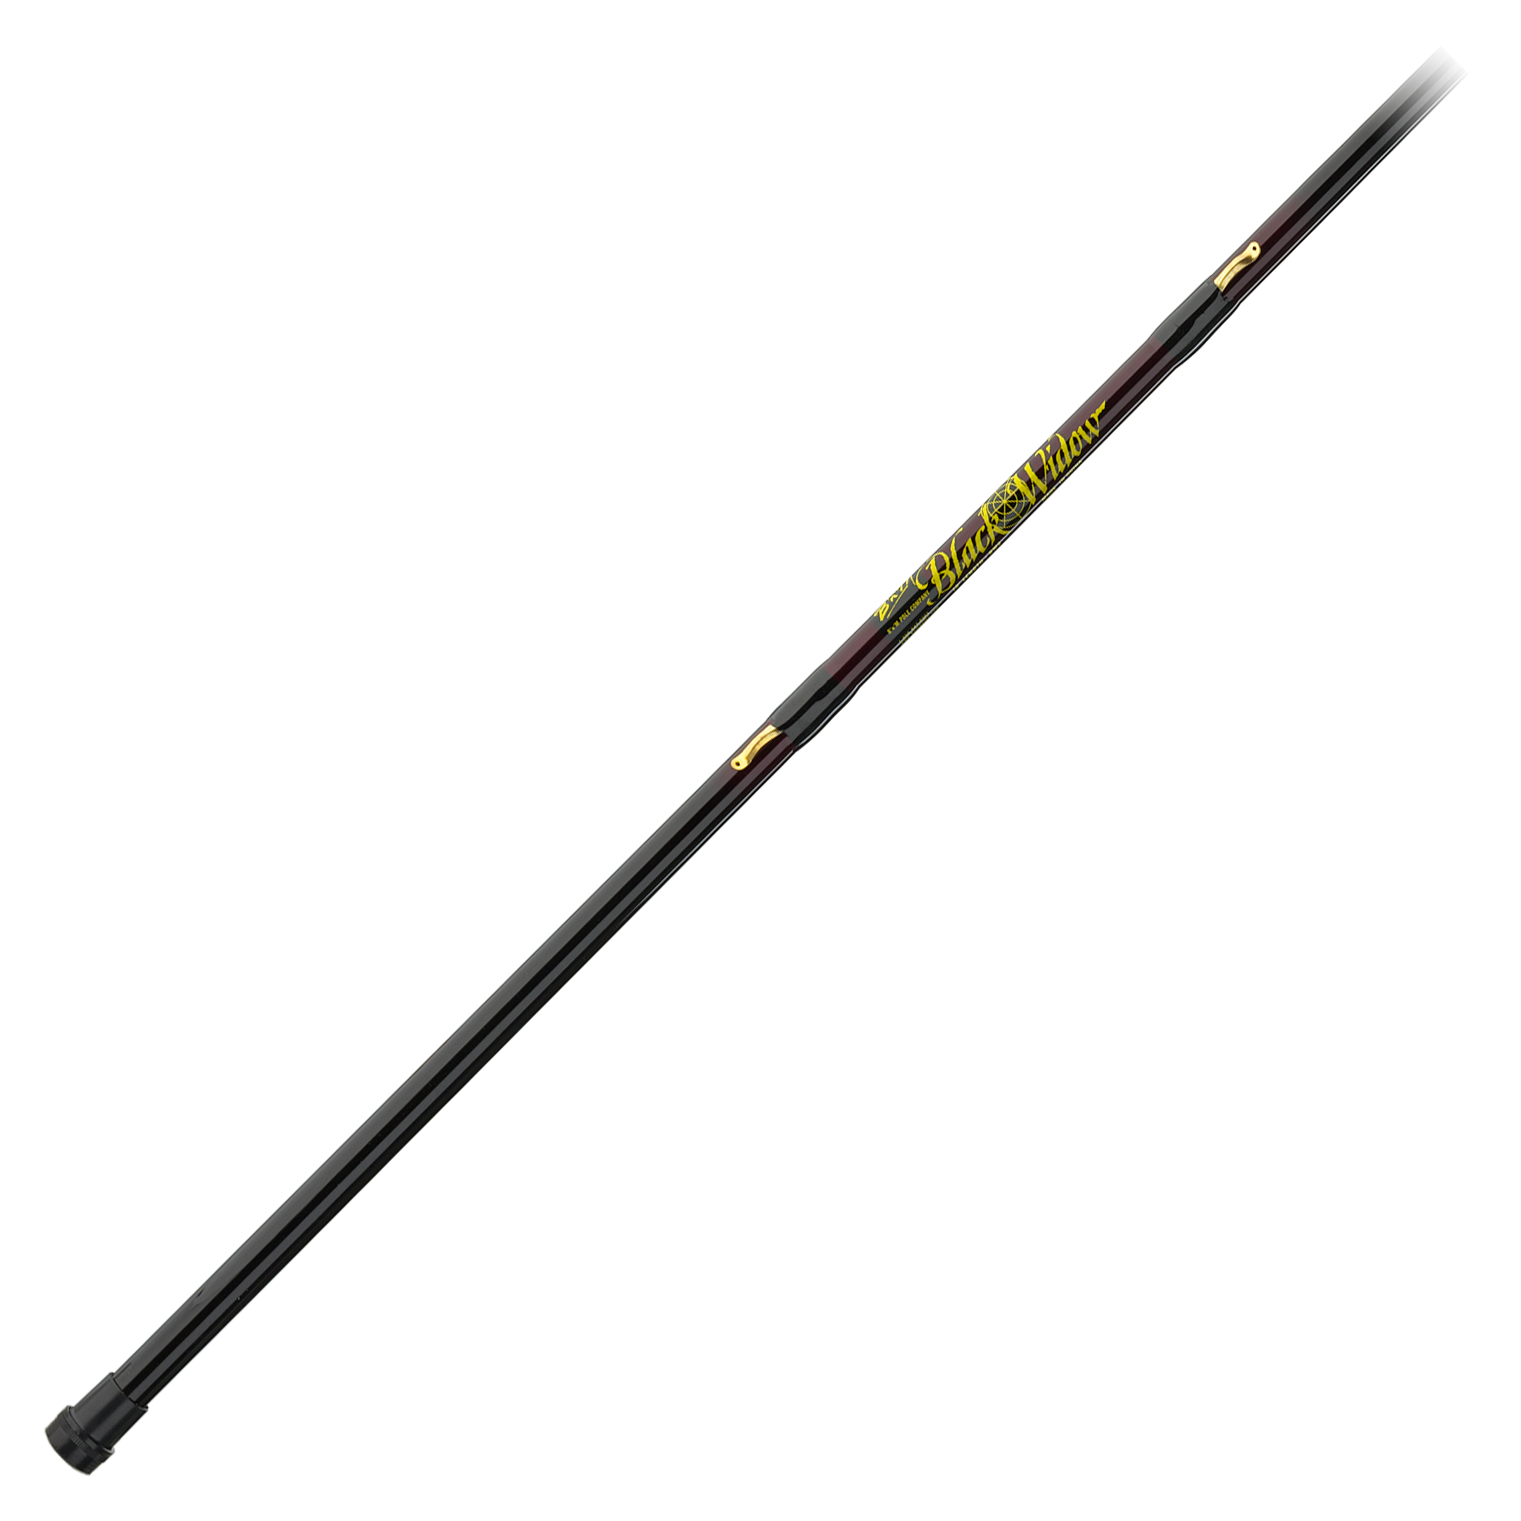 Fishing Rod Holder Metal Extendable Stand Ground Telescopic Pole